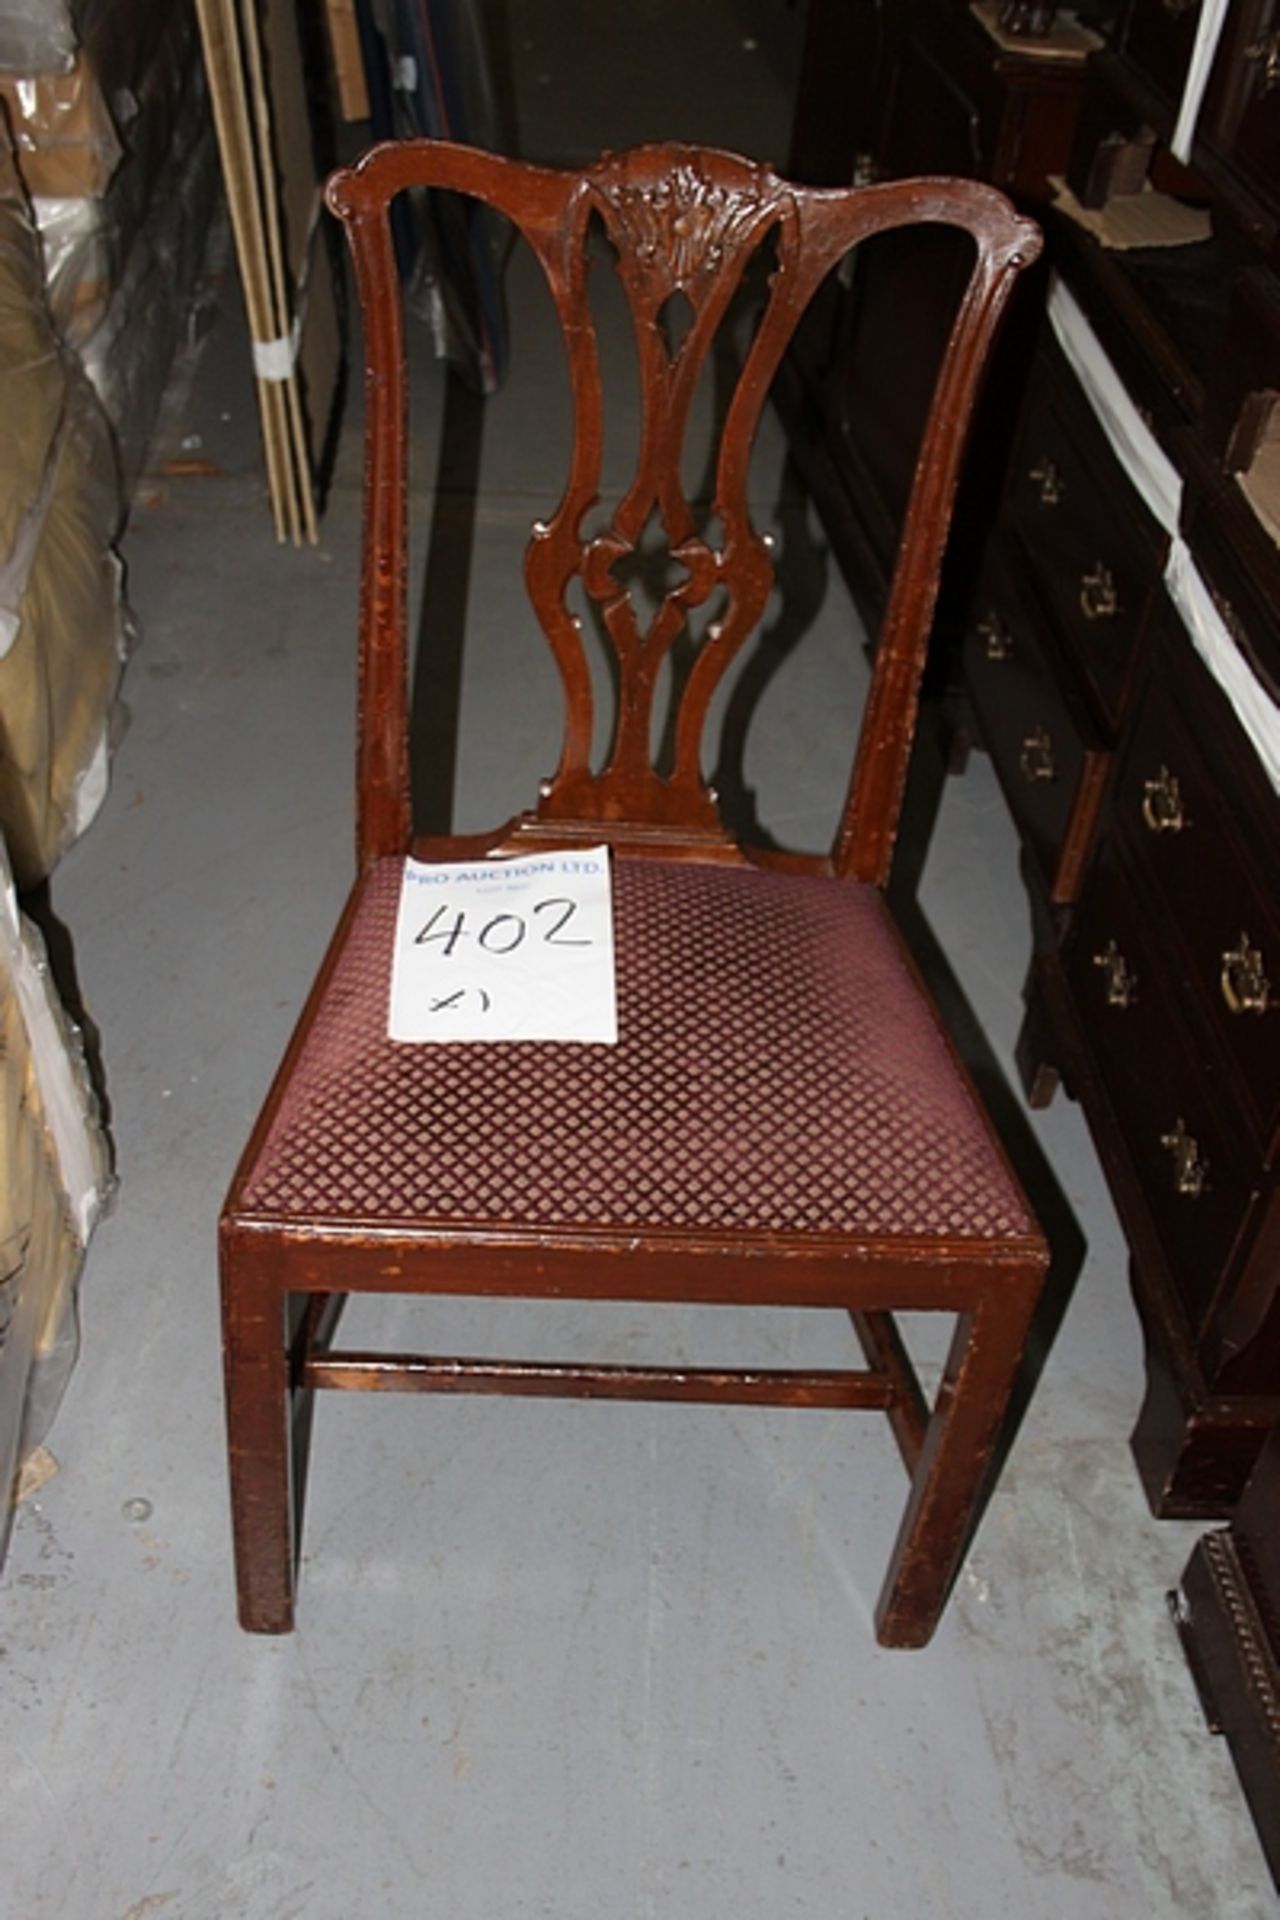 A mahogany side chair with a red and gold seat pad intricate carved back rest